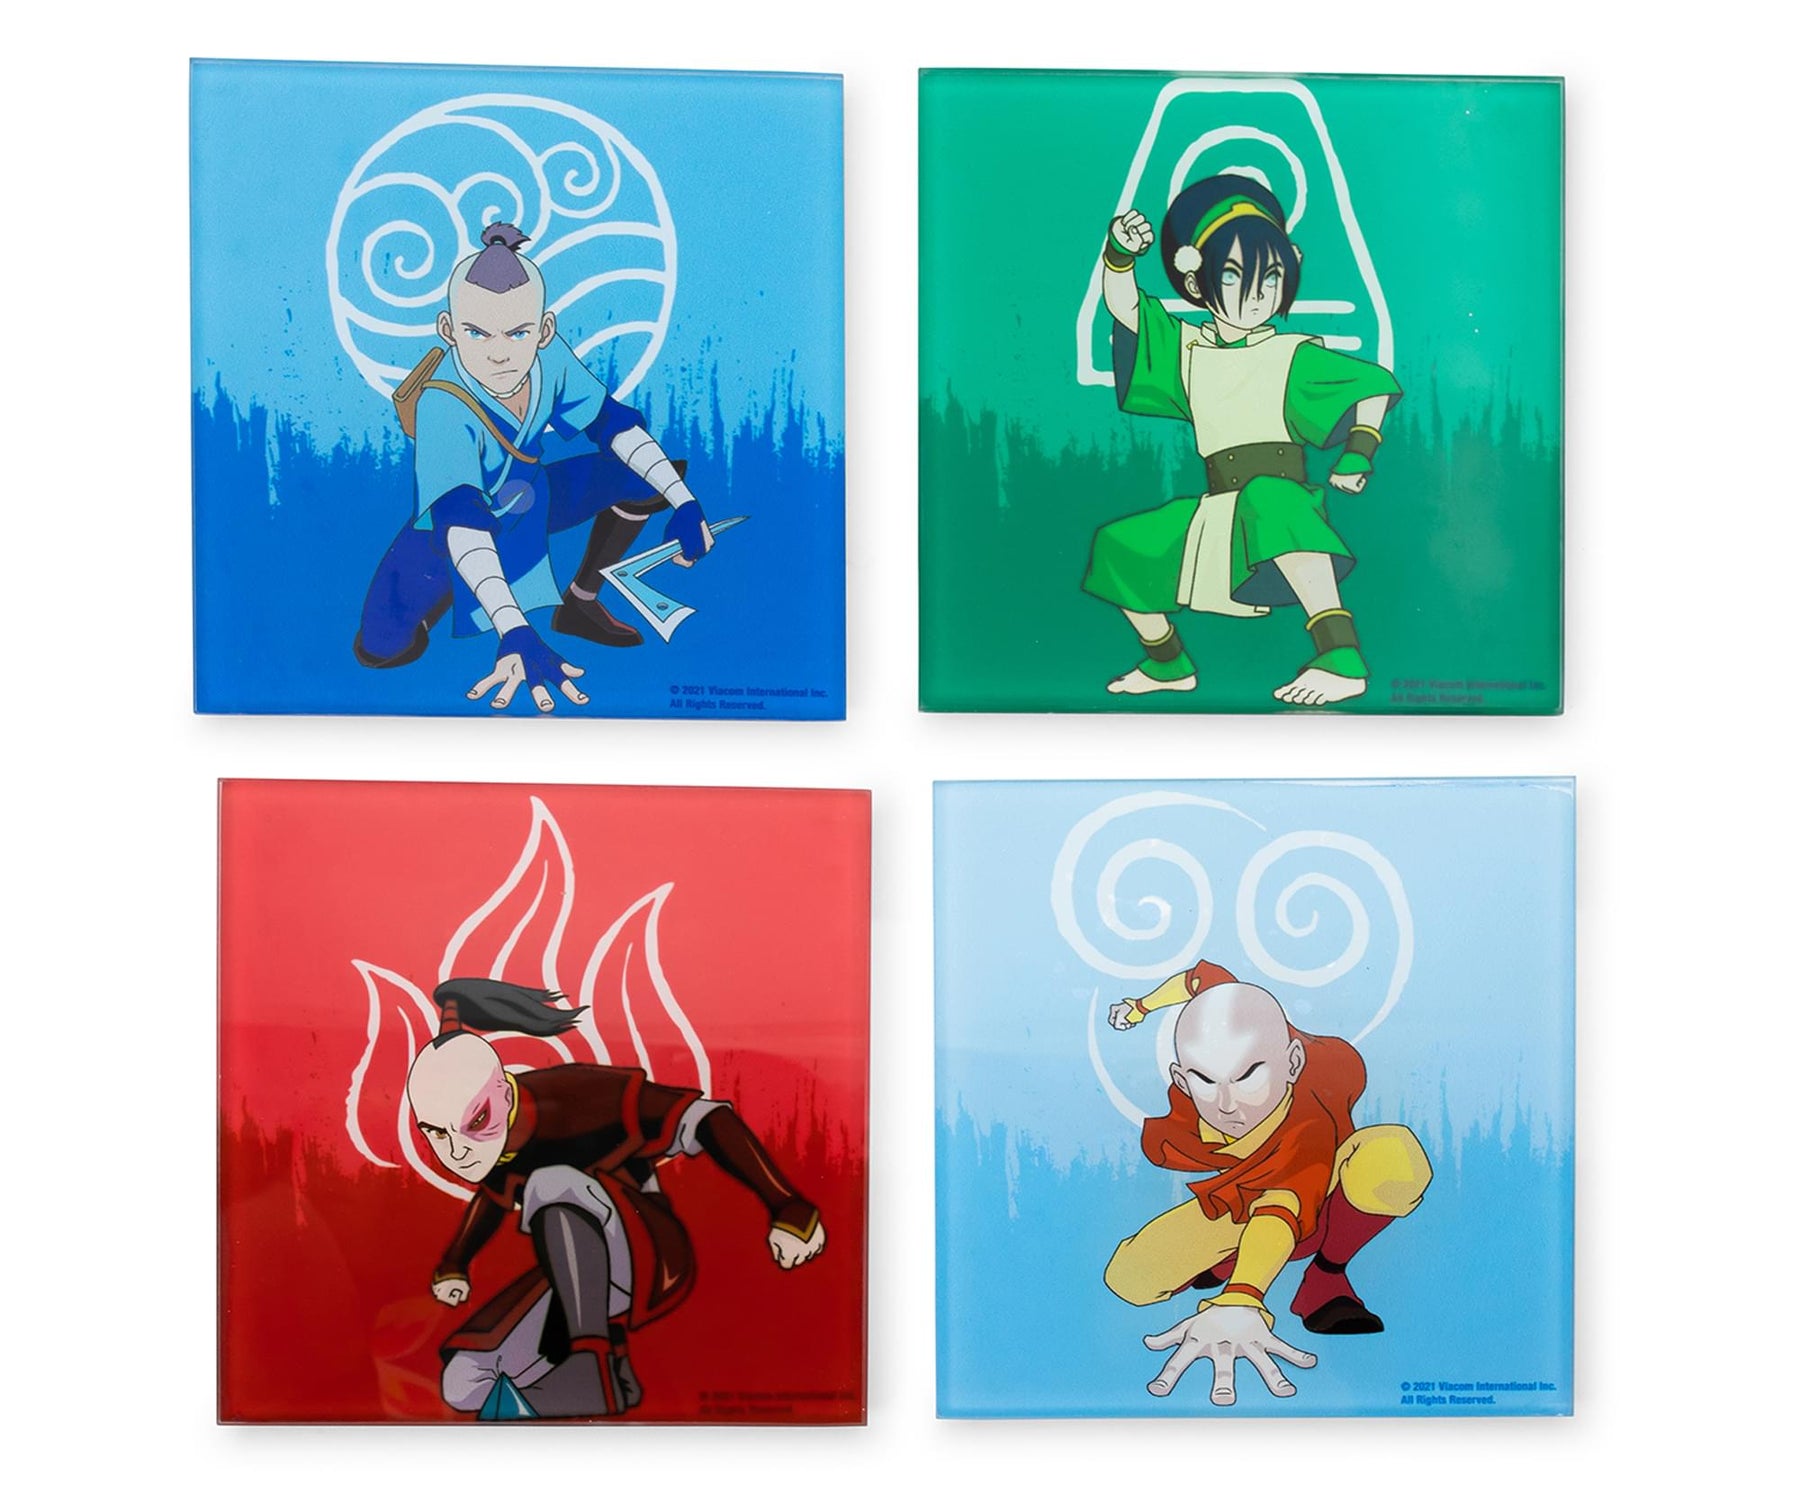 Avatar: The Last Airbender Characters Glass Coasters | Set of 4